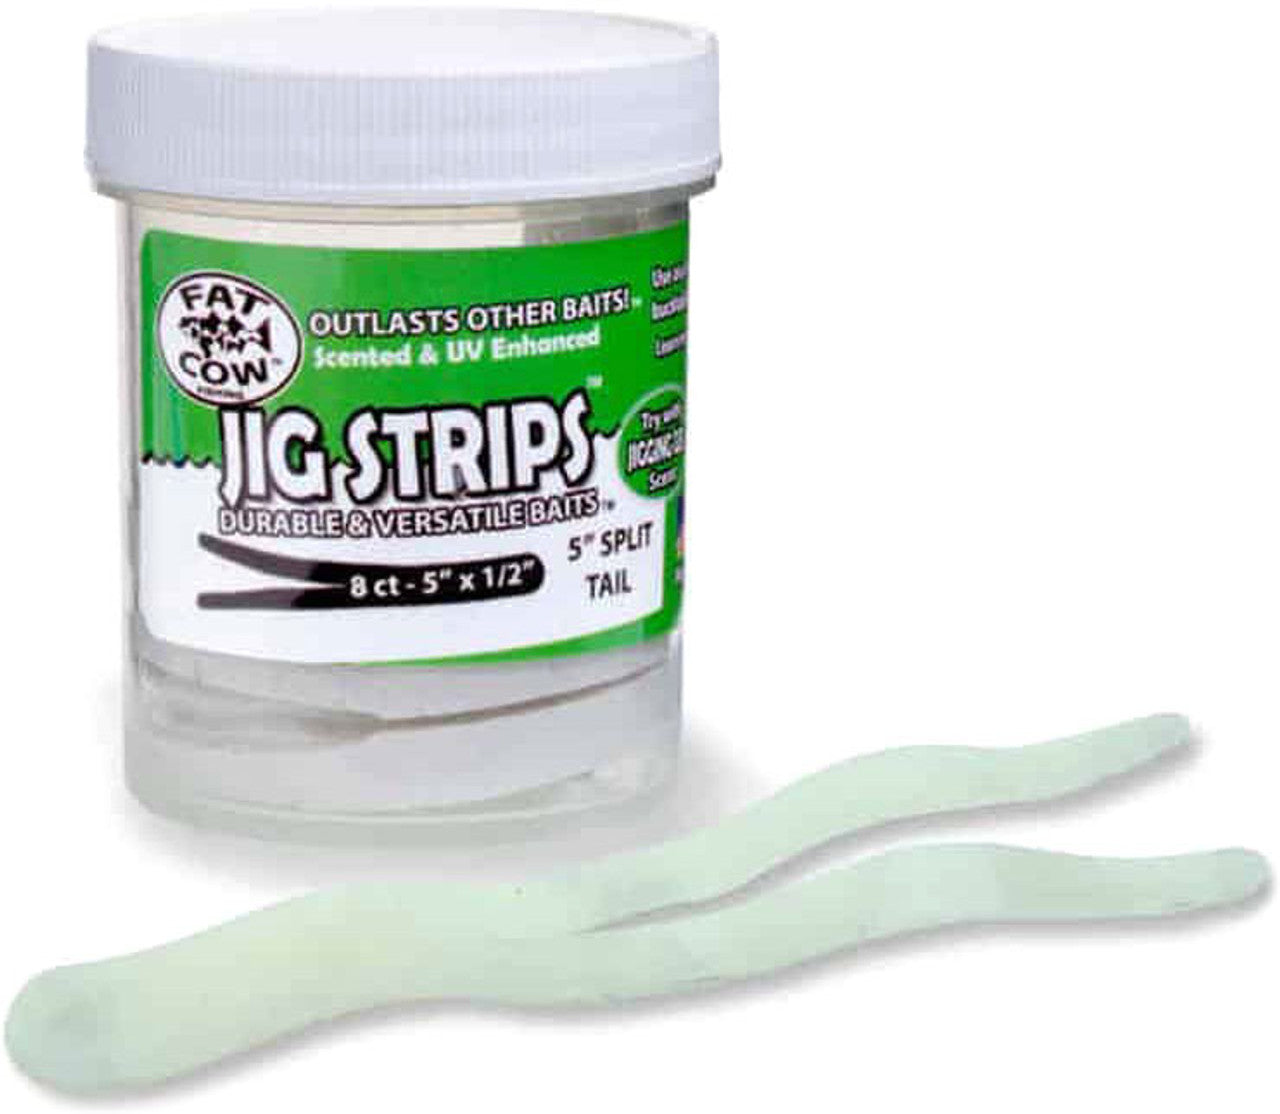 Fat Cow Fishing Jig Strips - Split Tail, 5" X 1/2", Scented